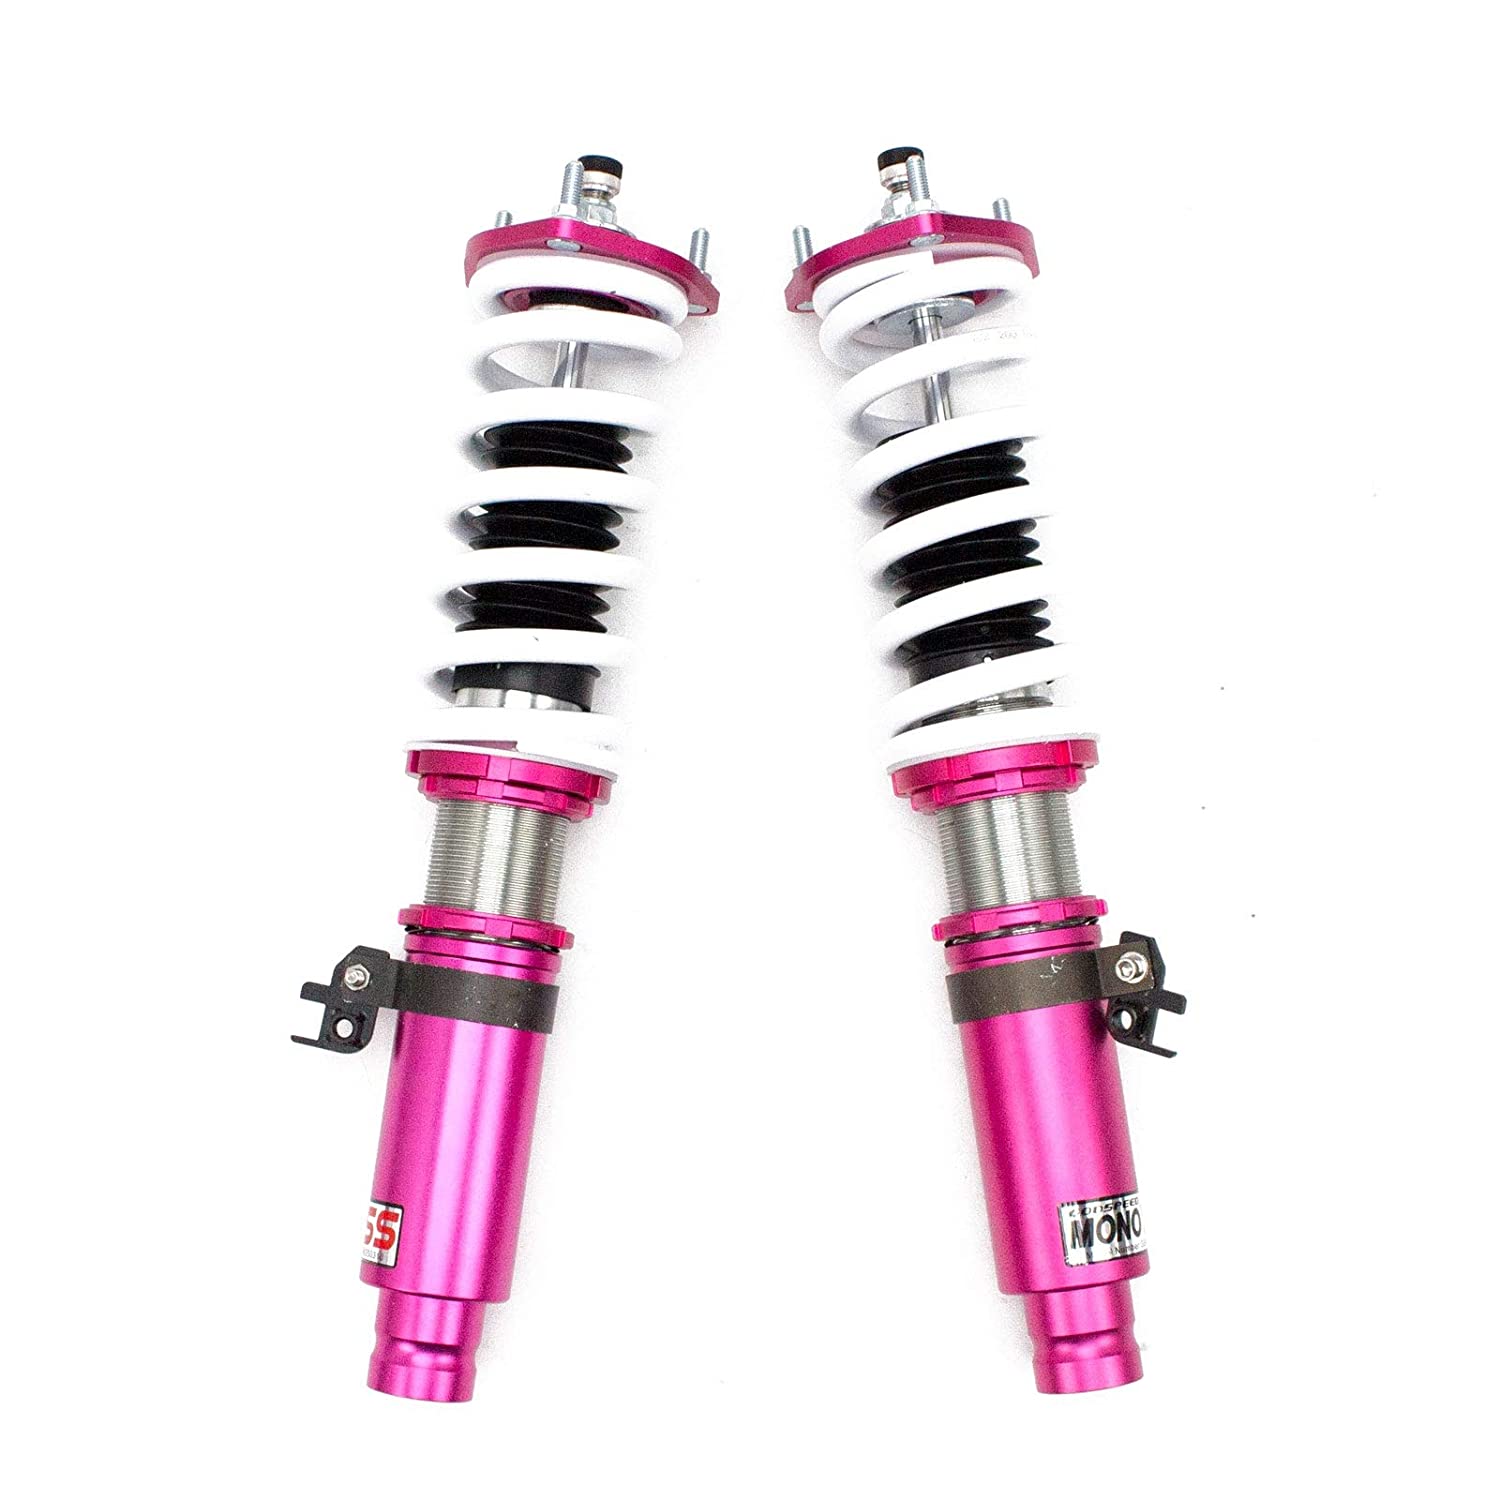 Godspeed MSS0310-D MonoSS Coilover Lowering Kit, Fully Adjustable, Ride Height, Spring Tension And 16 Click Damping, Mercury Milan 2006 2007 2008 2009 2010 2011